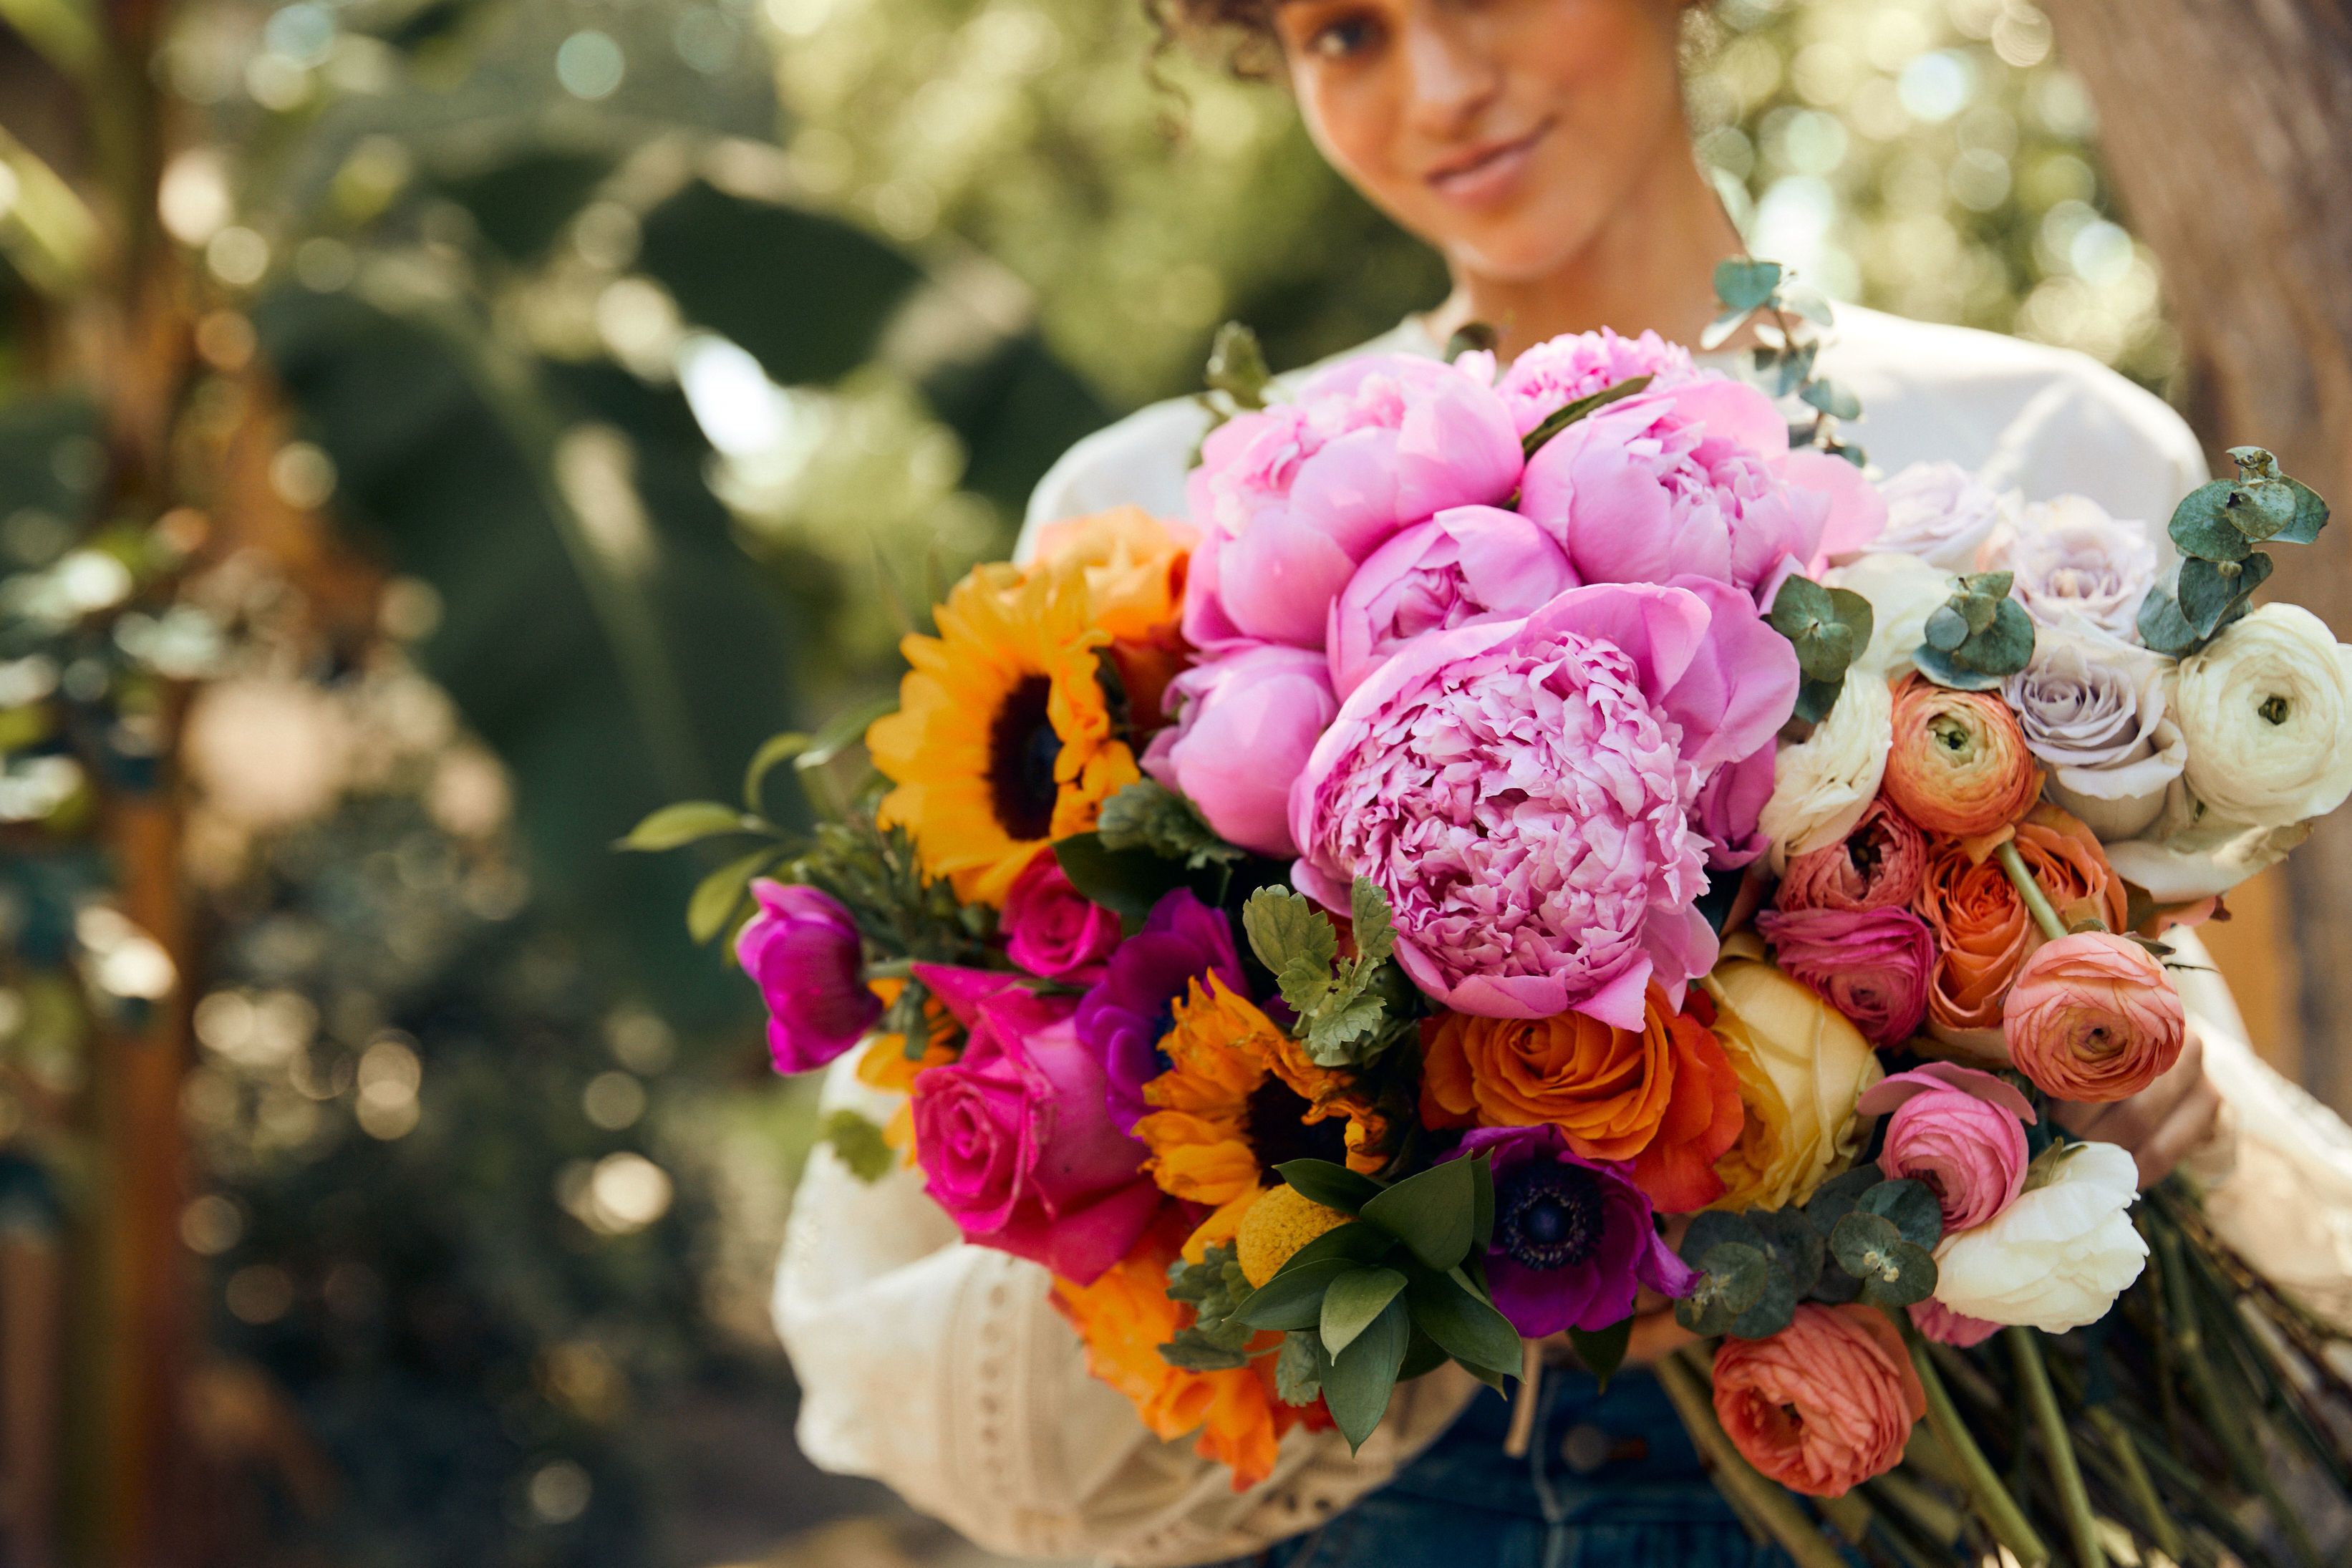 Close up of woman holding a sunflower, peonies, and roses bouquet.